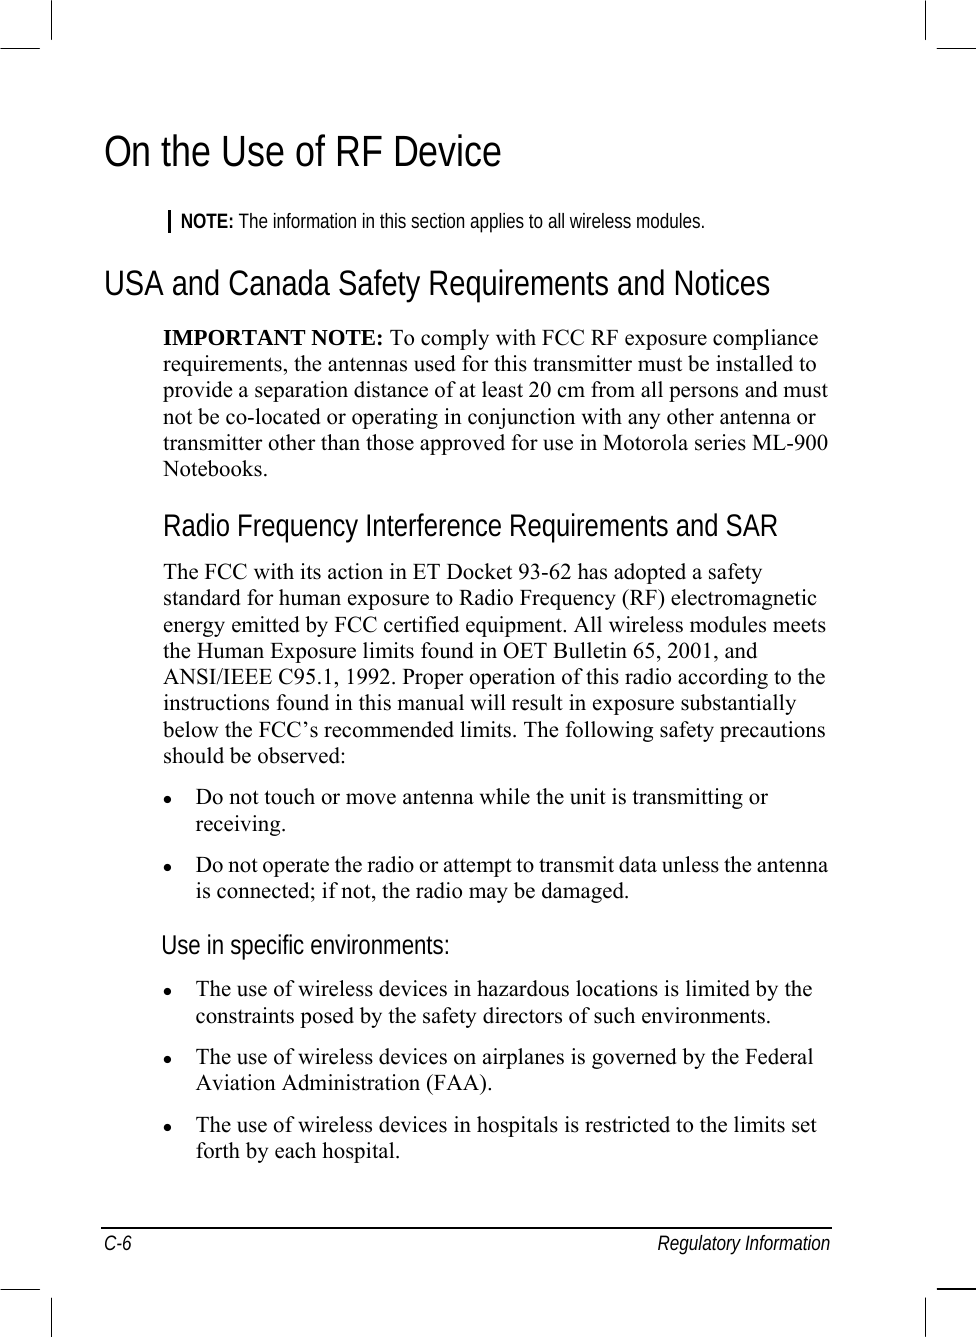  C-6 Regulatory Information On the Use of RF Device  NOTE: The information in this section applies to all wireless modules.  USA and Canada Safety Requirements and Notices  IMPORTANT NOTE: To comply with FCC RF exposure compliance  requirements, the antennas used for this transmitter must be installed to  provide a separation distance of at least 20 cm from all persons and must  not be co-located or operating in conjunction with any other antenna or  transmitter other than those approved for use in Motorola series ML-900  Notebooks.  Radio Frequency Interference Requirements and SAR  The FCC with its action in ET Docket 93-62 has adopted a safety  standard for human exposure to Radio Frequency (RF) electromagnetic  energy emitted by FCC certified equipment. All wireless modules meets  the Human Exposure limits found in OET Bulletin 65, 2001, and  ANSI/IEEE C95.1, 1992. Proper operation of this radio according to the  instructions found in this manual will result in exposure substantially  below the FCC’s recommended limits. The following safety precautions  should be observed:    Do not touch or move antenna while the unit is transmitting or  receiving.    Do not operate the radio or attempt to transmit data unless the antenna  is connected; if not, the radio may be damaged.  Use in specific environments:    The use of wireless devices in hazardous locations is limited by the  constraints posed by the safety directors of such environments.    The use of wireless devices on airplanes is governed by the Federal  Aviation Administration (FAA).    The use of wireless devices in hospitals is restricted to the limits set  forth by each hospital.  